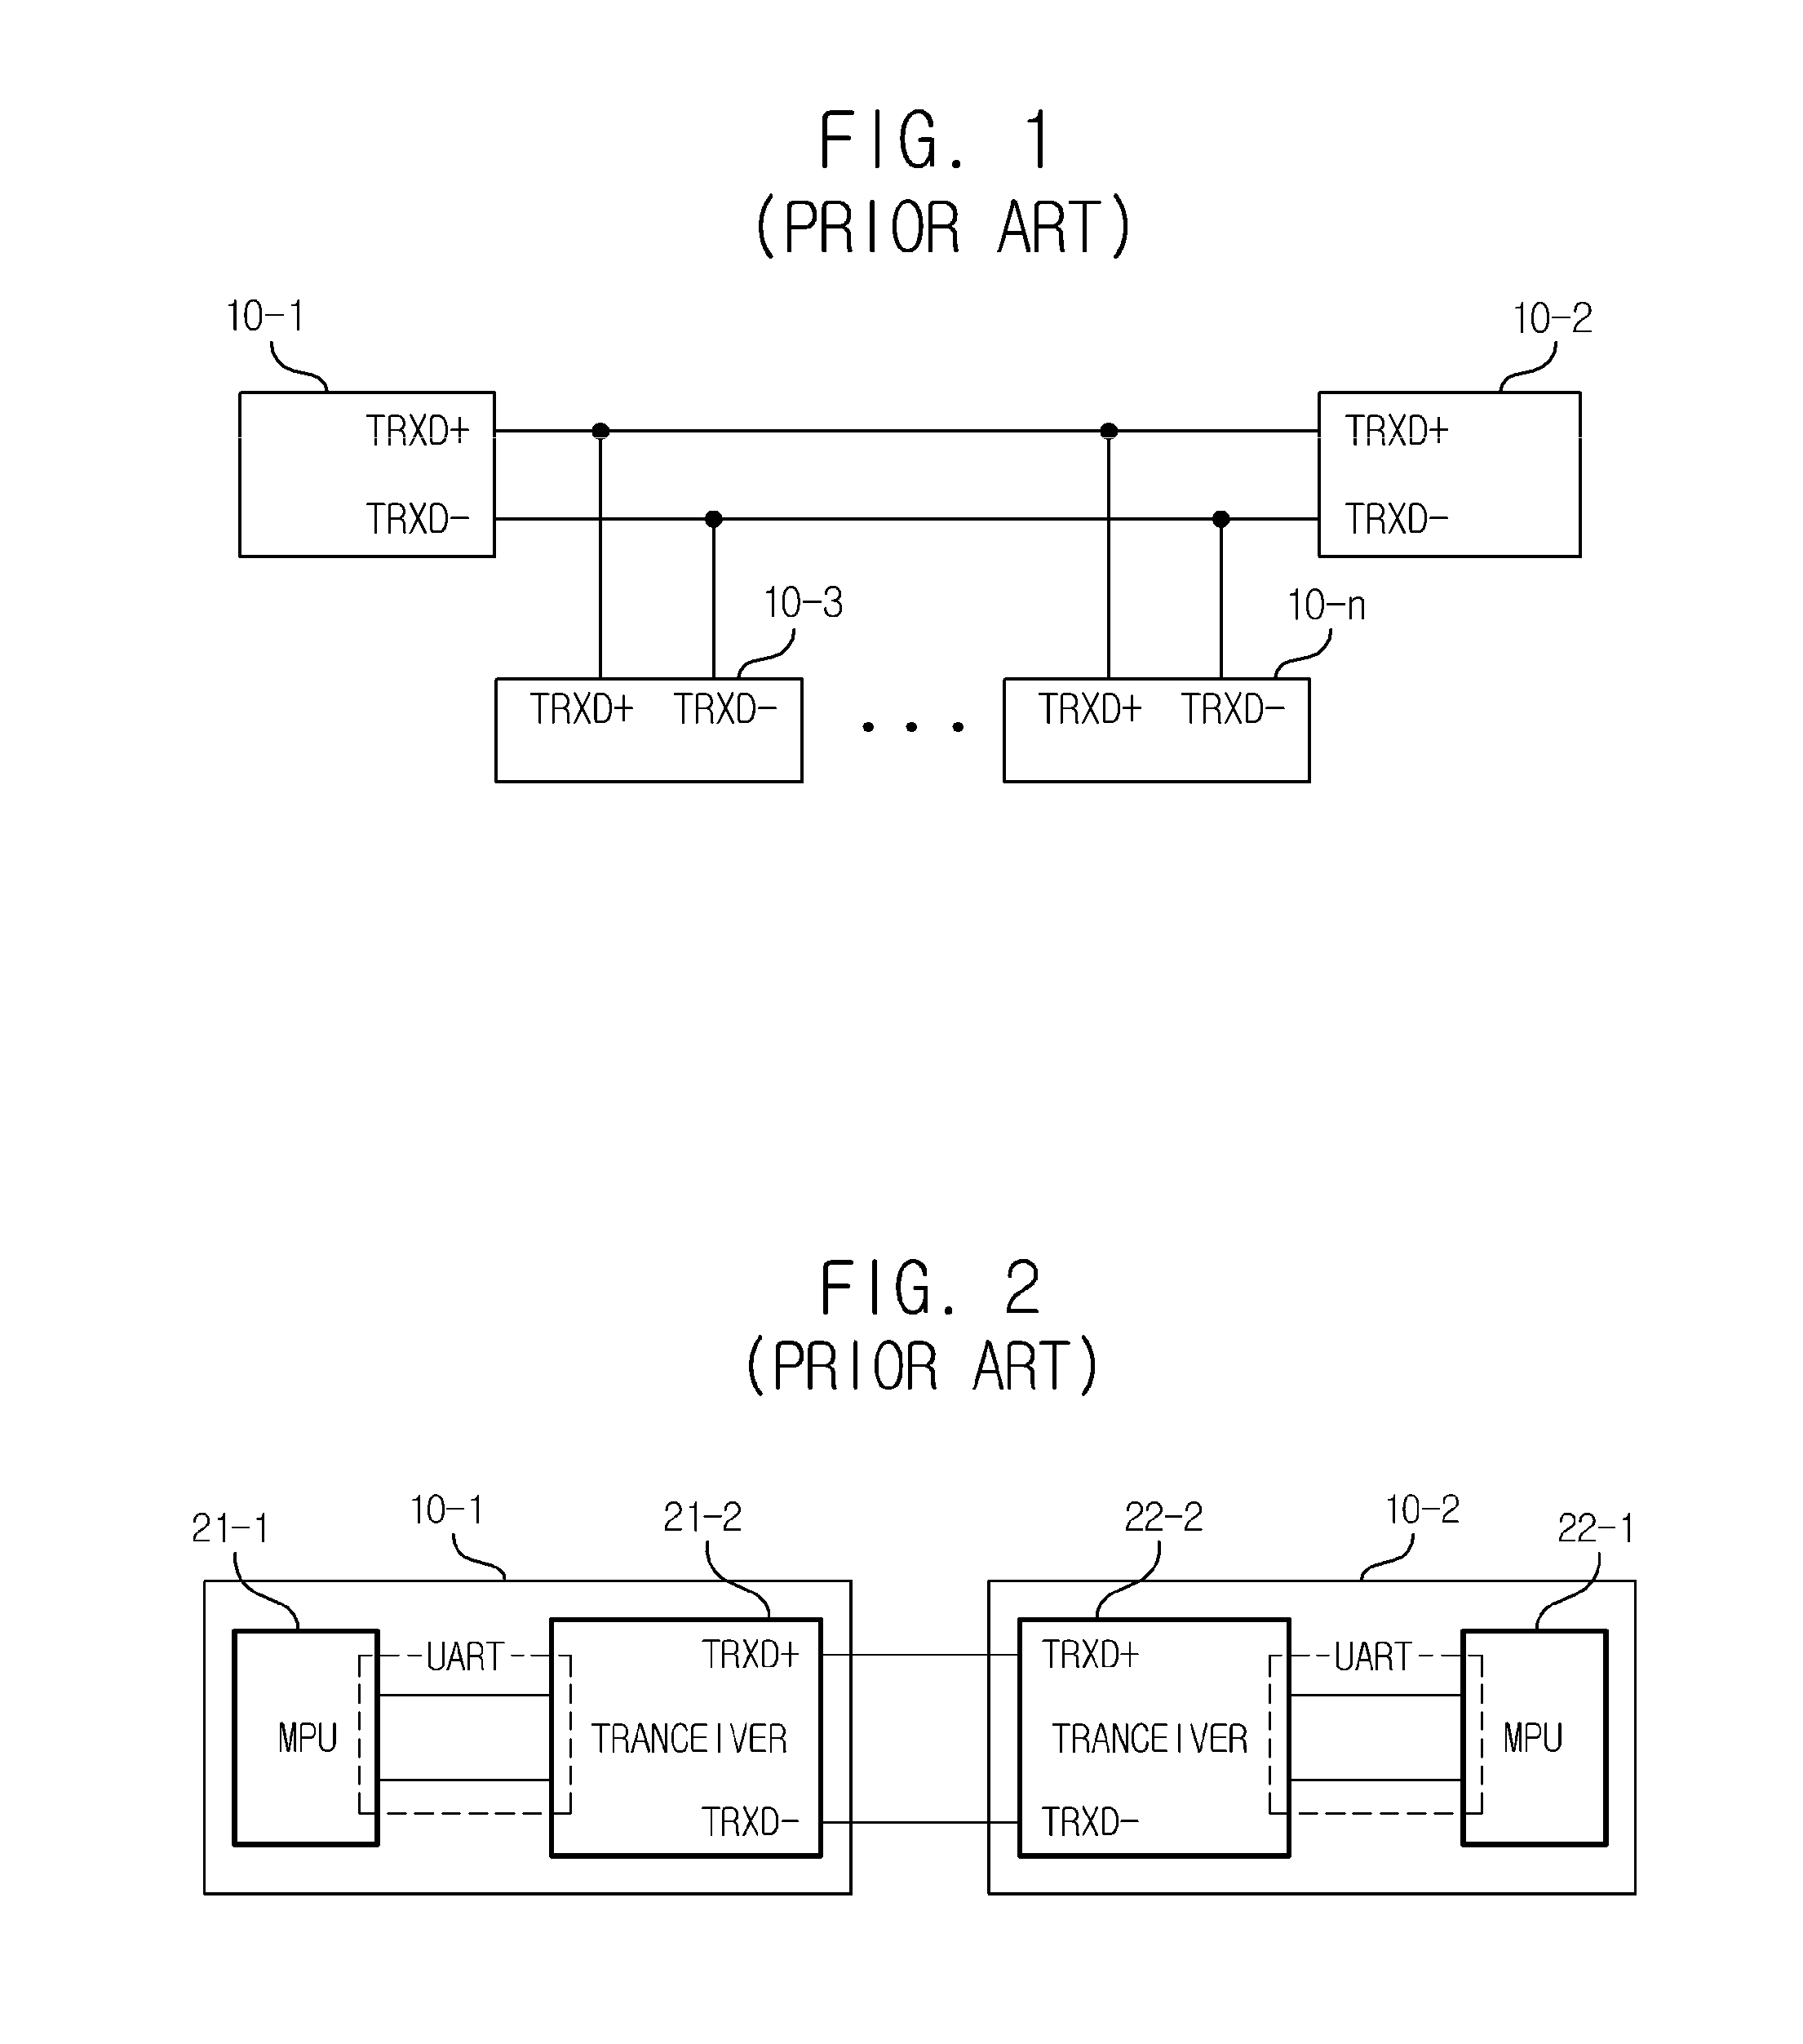 Apparatus for converting terminal polarity for r s communication